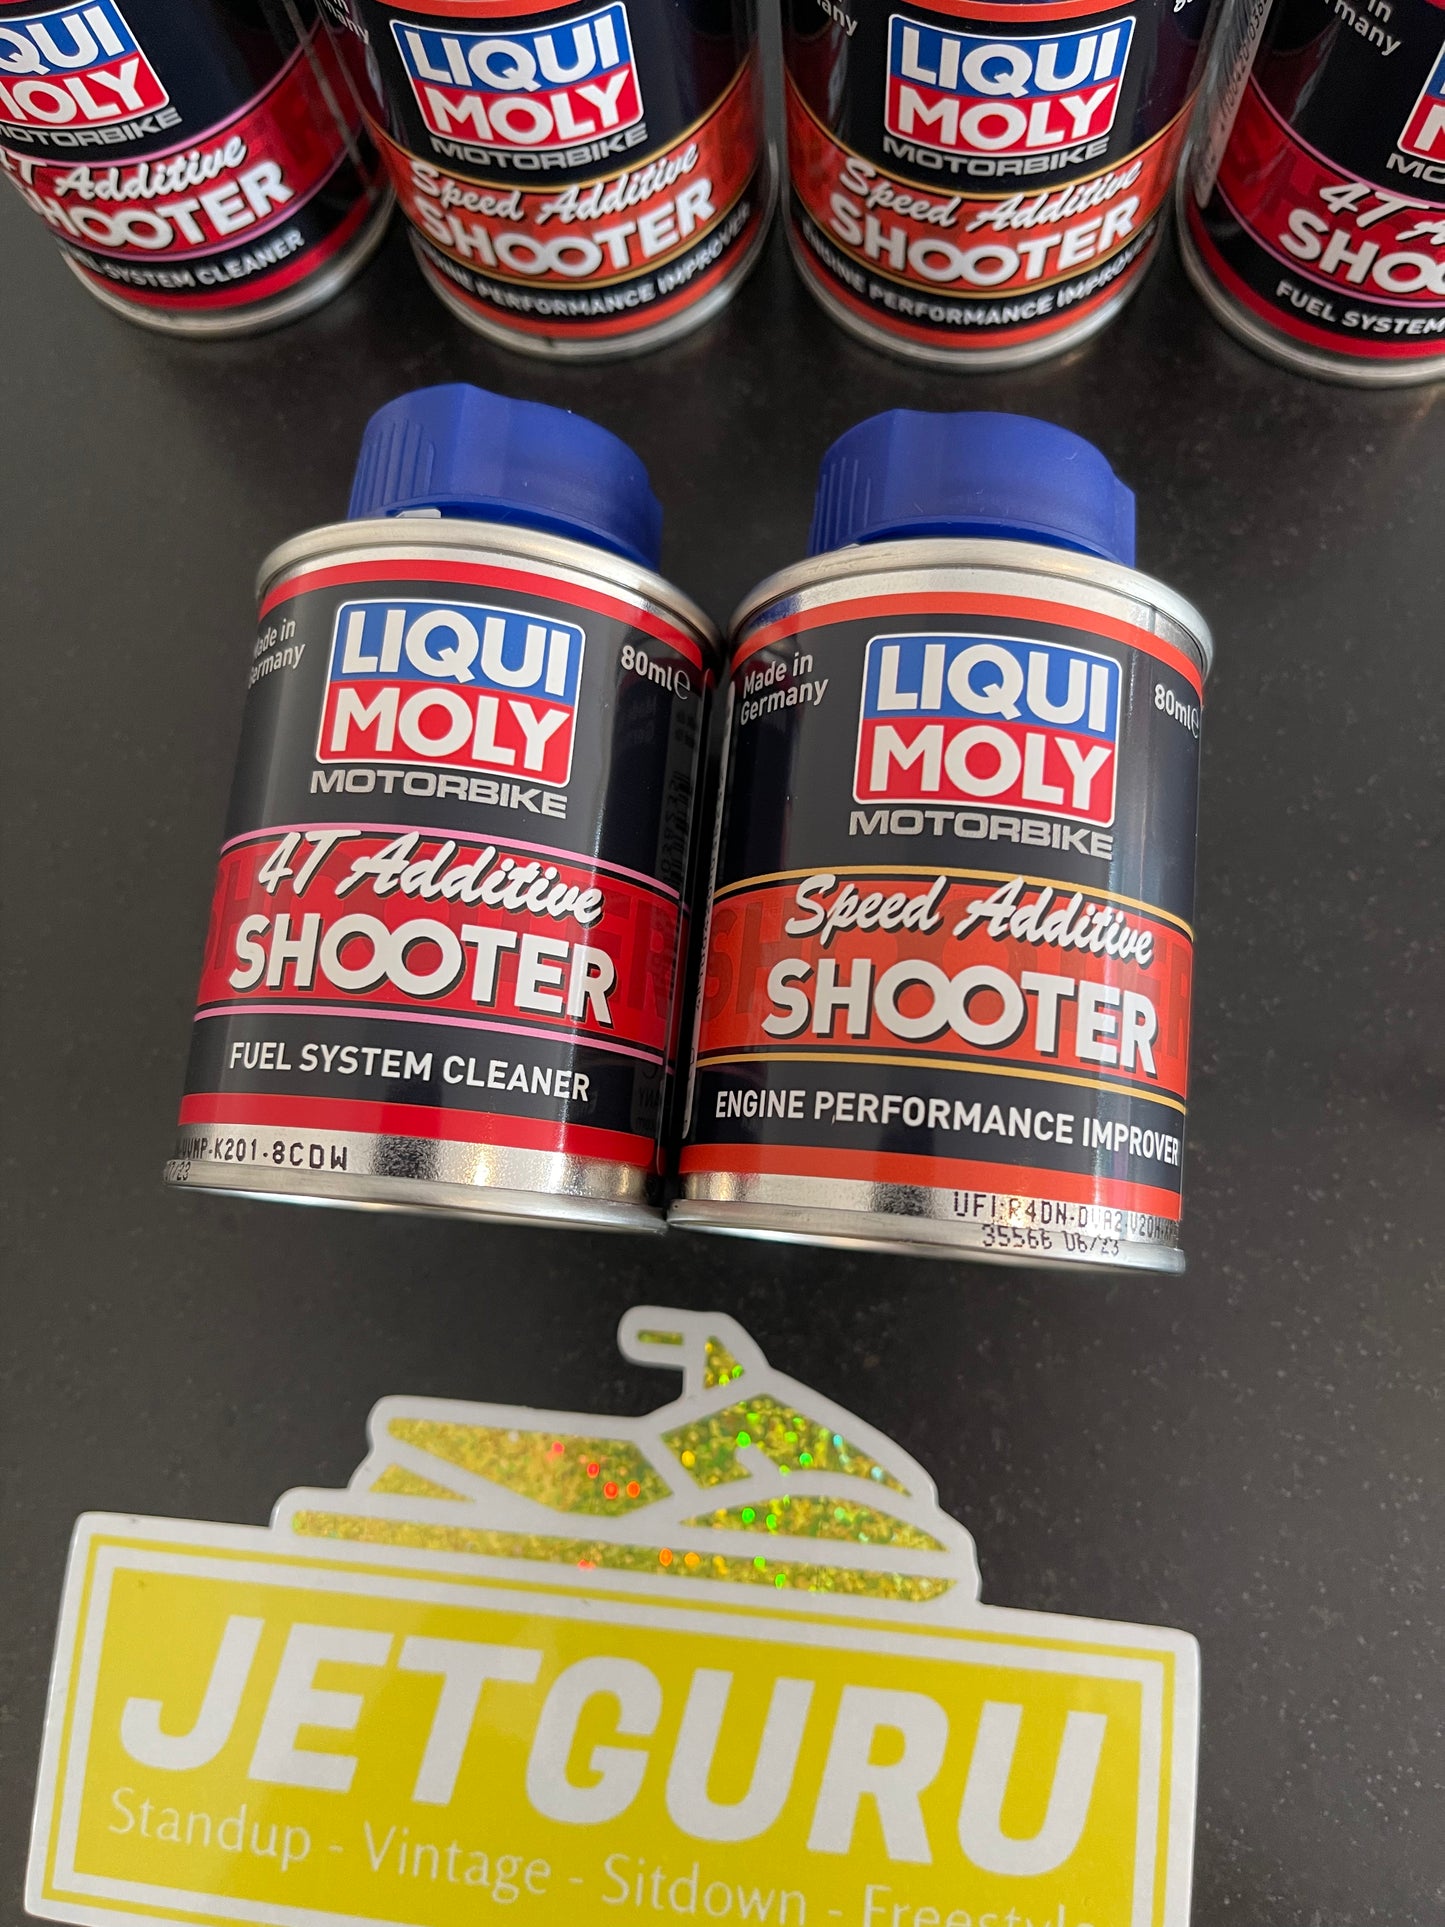 Liqui-Moly Speed Shooter & Engine Cleaner 80ml